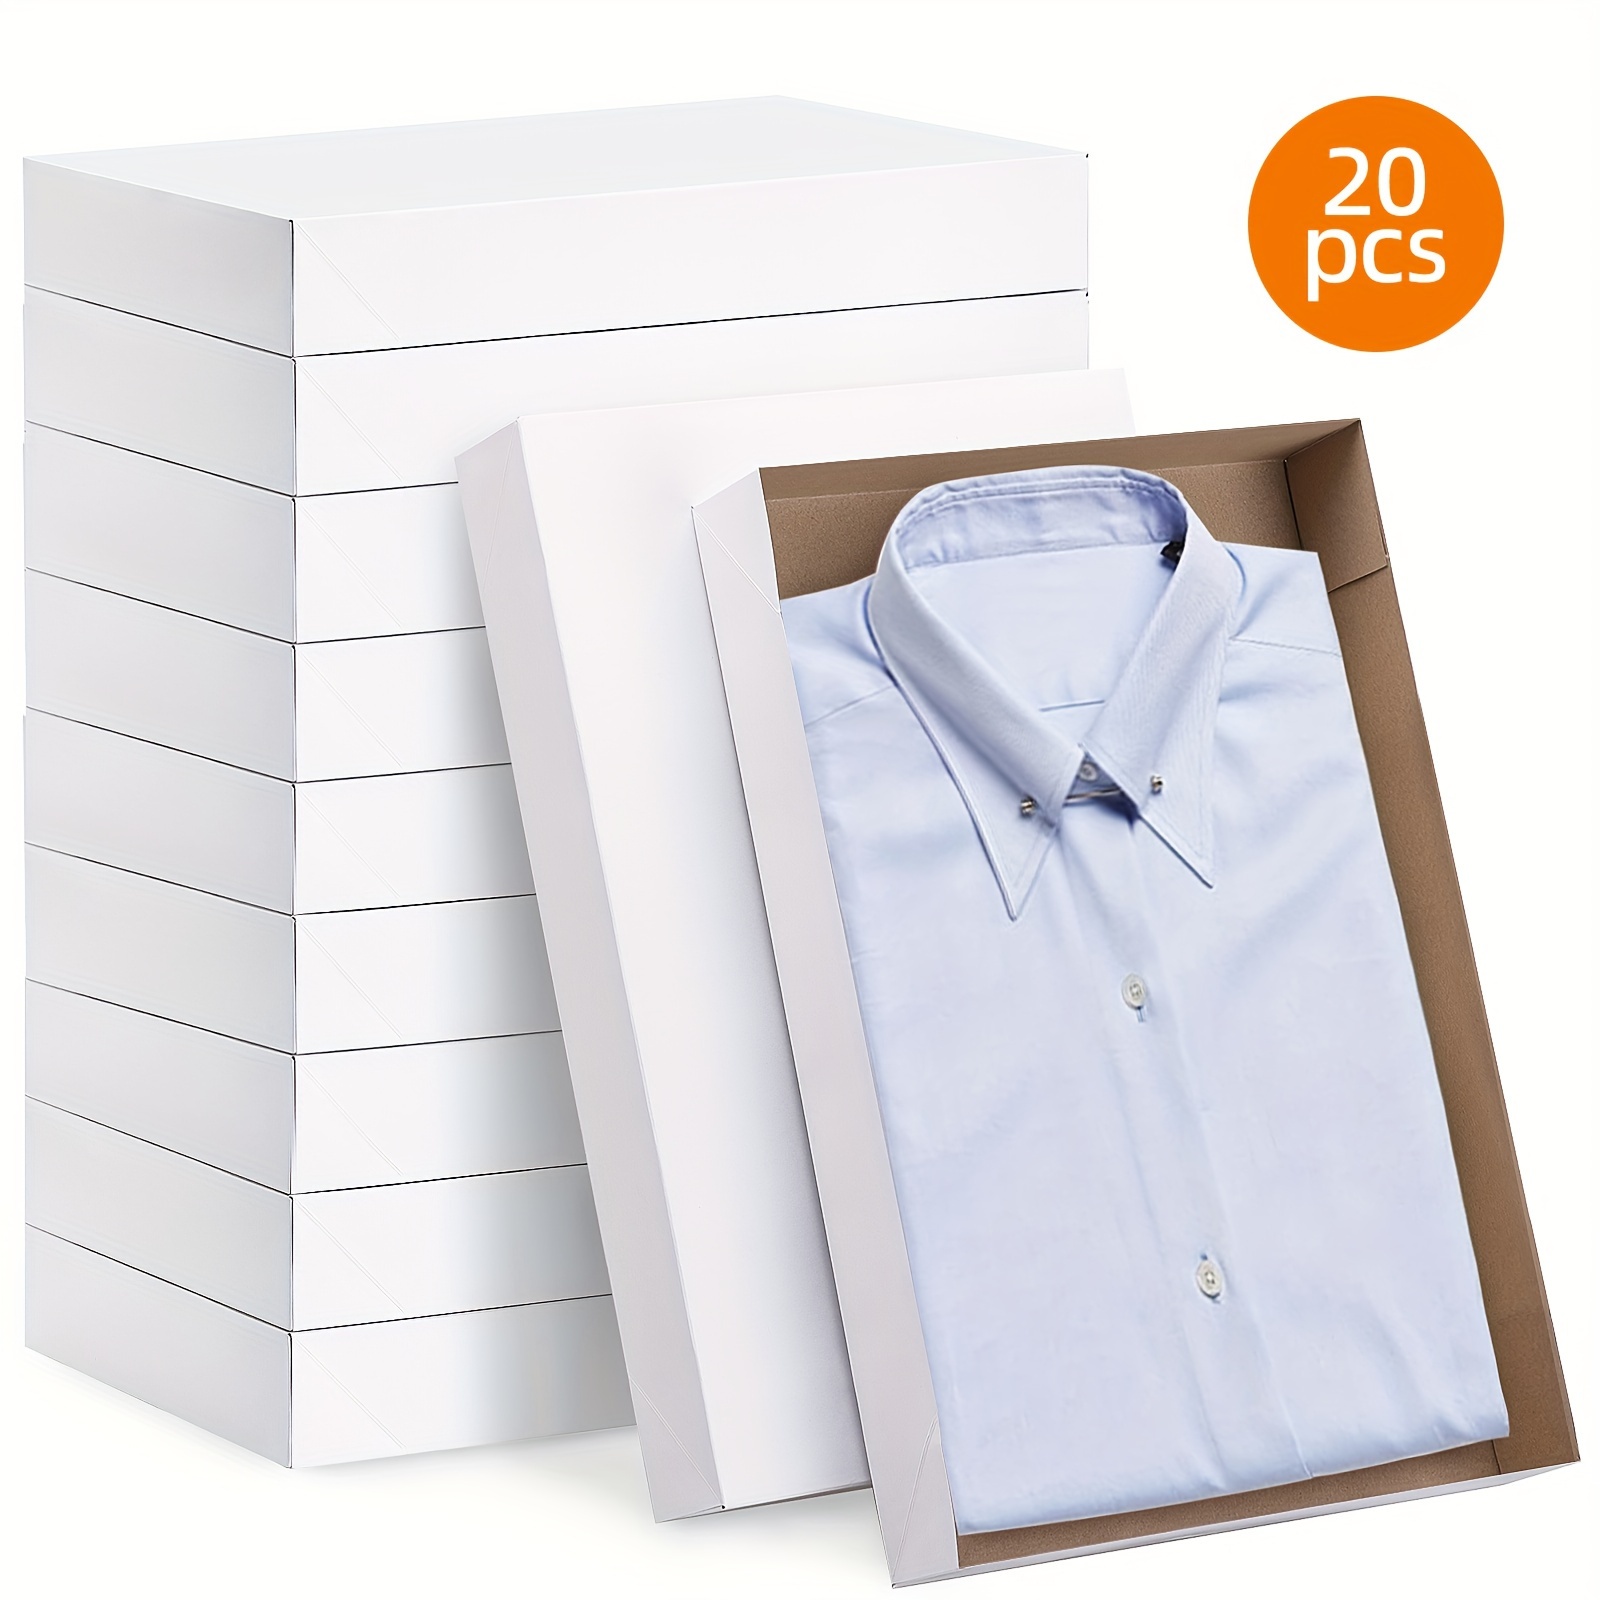 

20 Pack Shirt Boxes, Extra Depth Gift Boxes For Presents With Lids White Gift Boxes With Lids For Clothes Large Gift Boxes Bulk For Presents, Holidays, Birthdays, 17x11x4 In